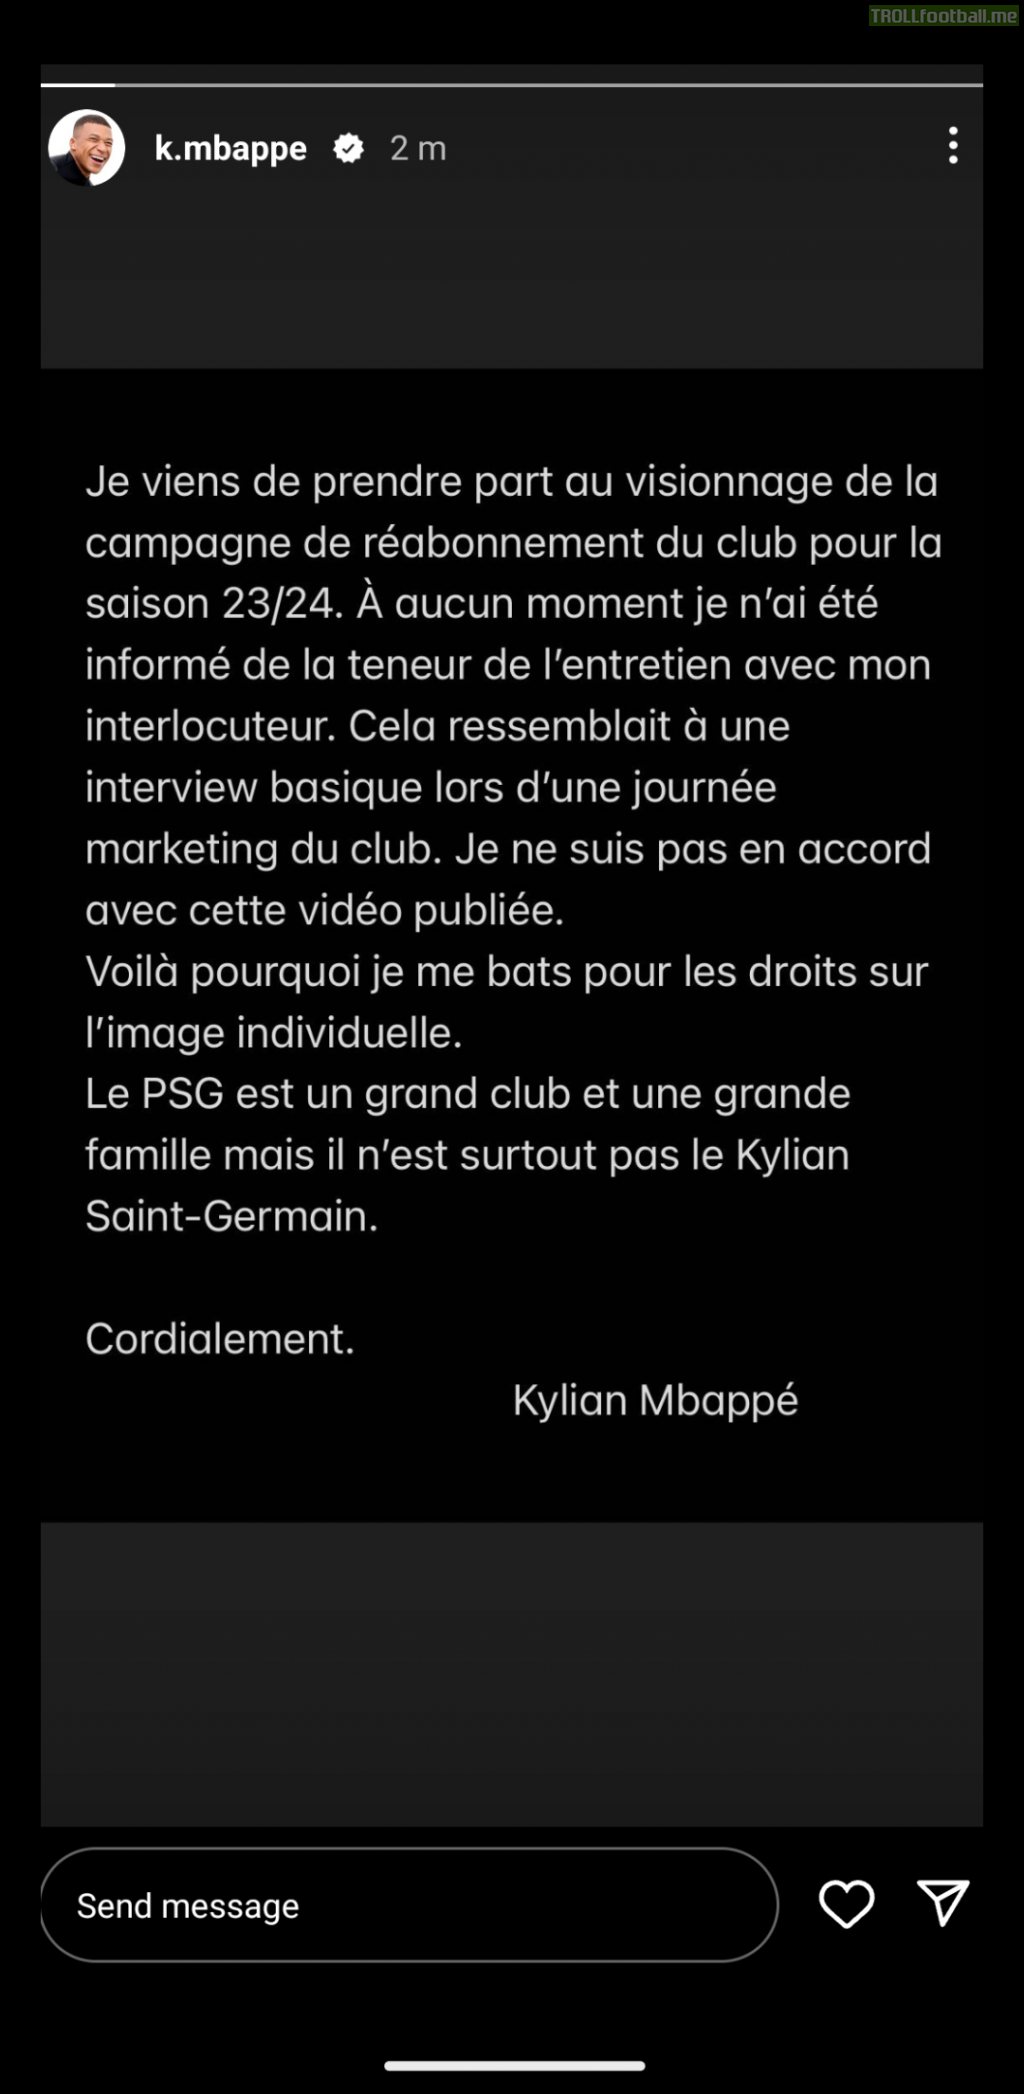 Kylian Mbappe on Instagram: "PSG is a big club and a big family but it is not Kylian Saint-Germain"